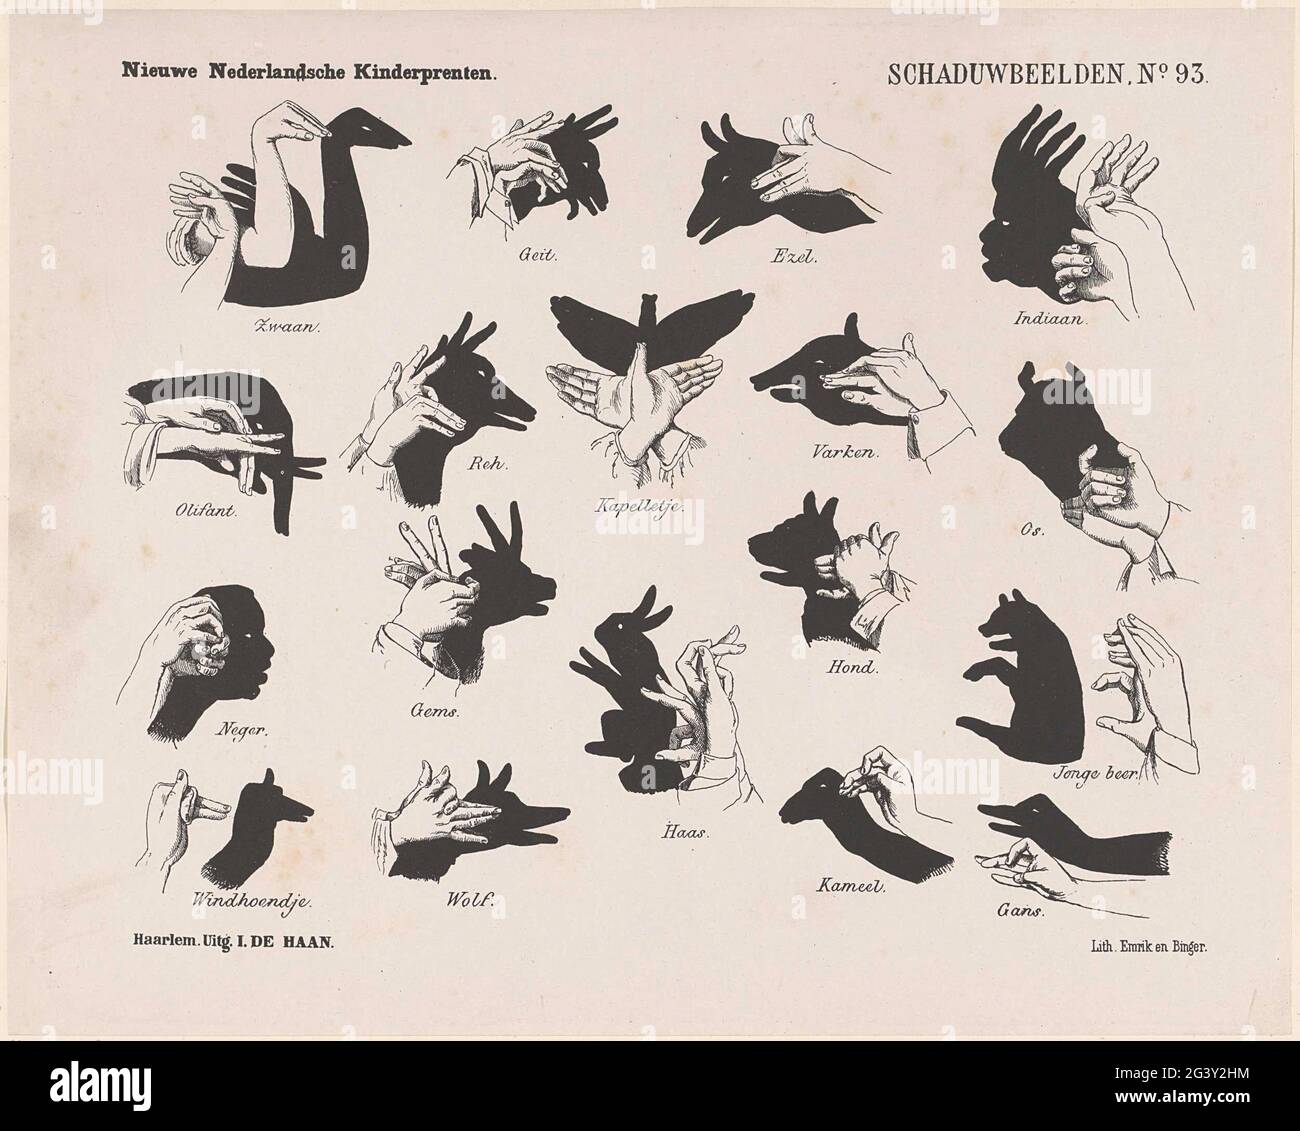 Shadow images; New Dutch childrens with 18 examples of shadow figures to mimic with the hands, such as a swan, an Indian, a pig and a goose. Under every